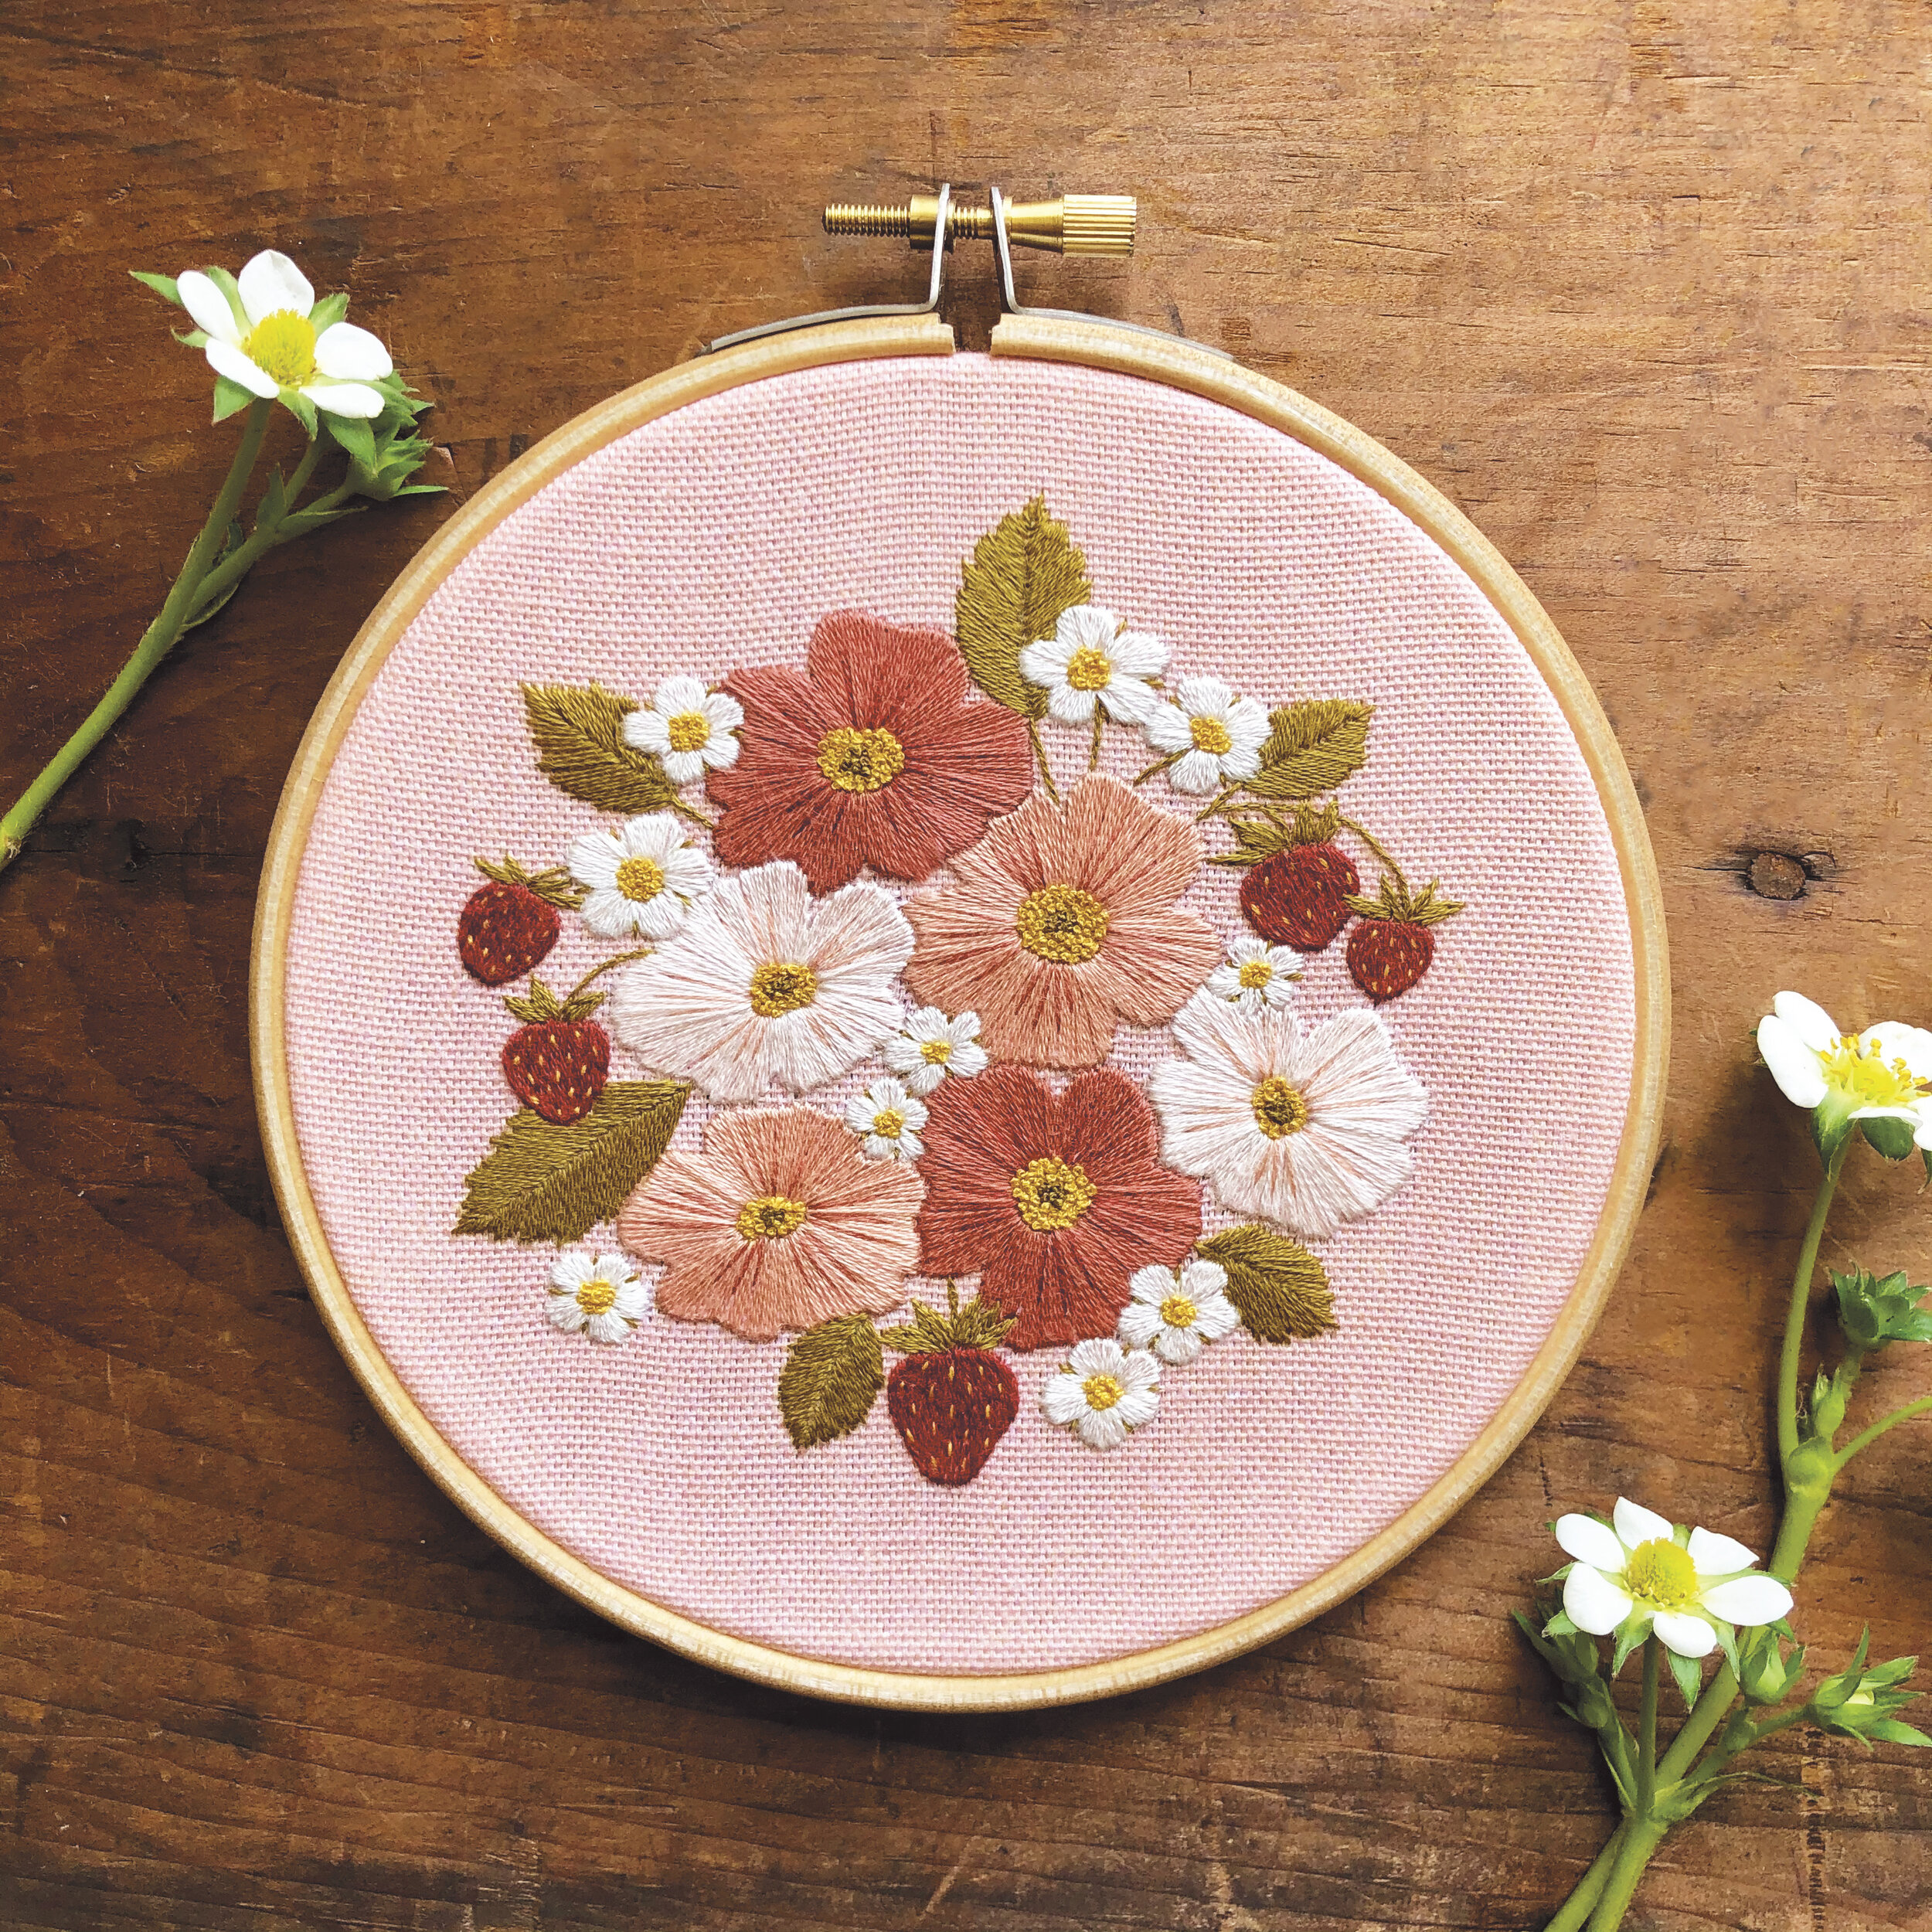 Strawberry and Rose Embroidery rgb.jpg